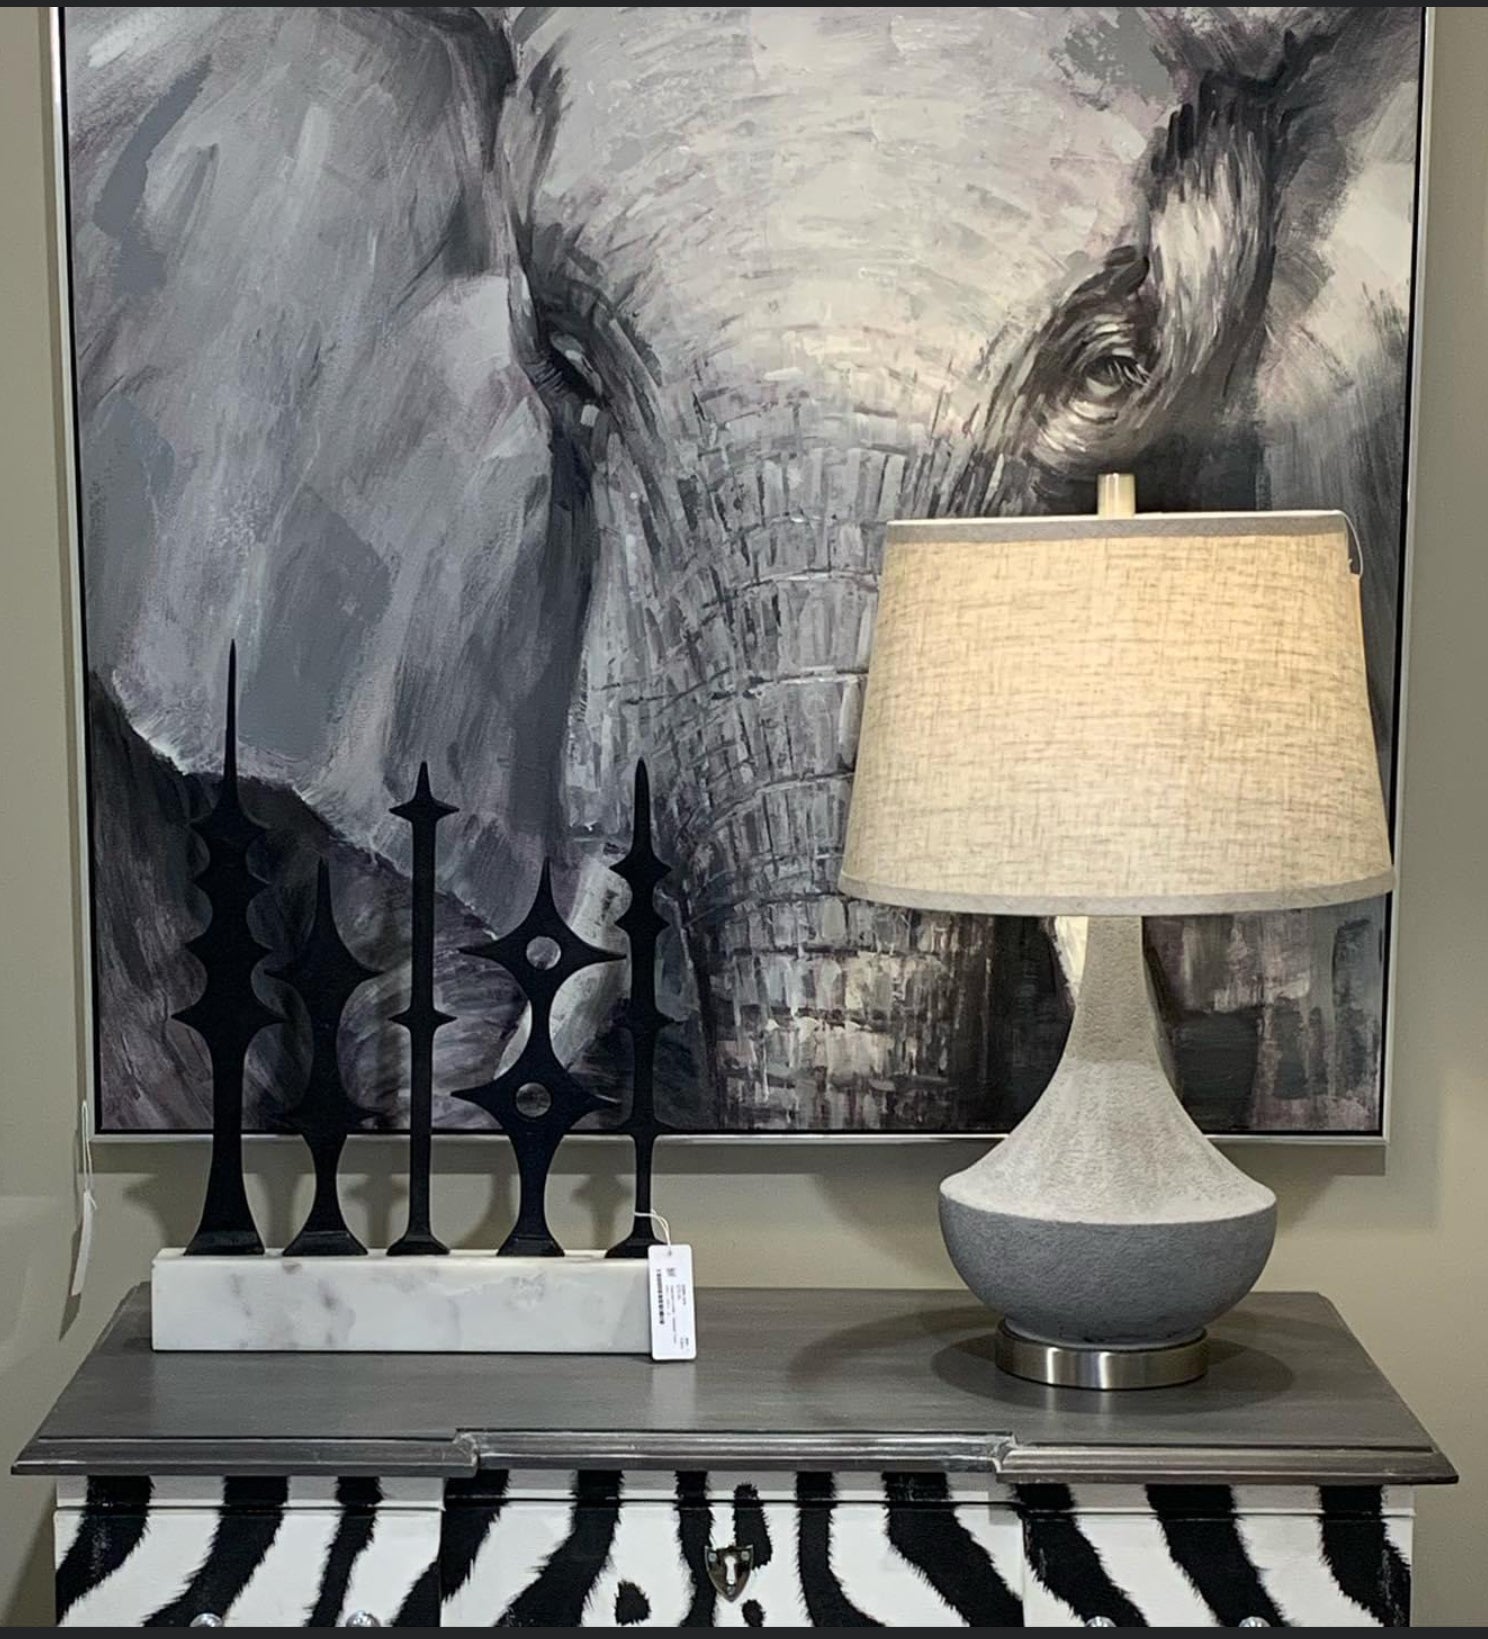 Stand apart from the herd with this picturesque pachyderm, captured in living paint.  A distinctive decorative accent, perfect for creating a focal point. Crafted quality materials for lasting enjoyment to make a statement in any setting.Great design updates the feel and tone of any room Complements a wide variety of styles.Enhances existing decor              Dimension (39.5h x 39.5w x 1.75l)